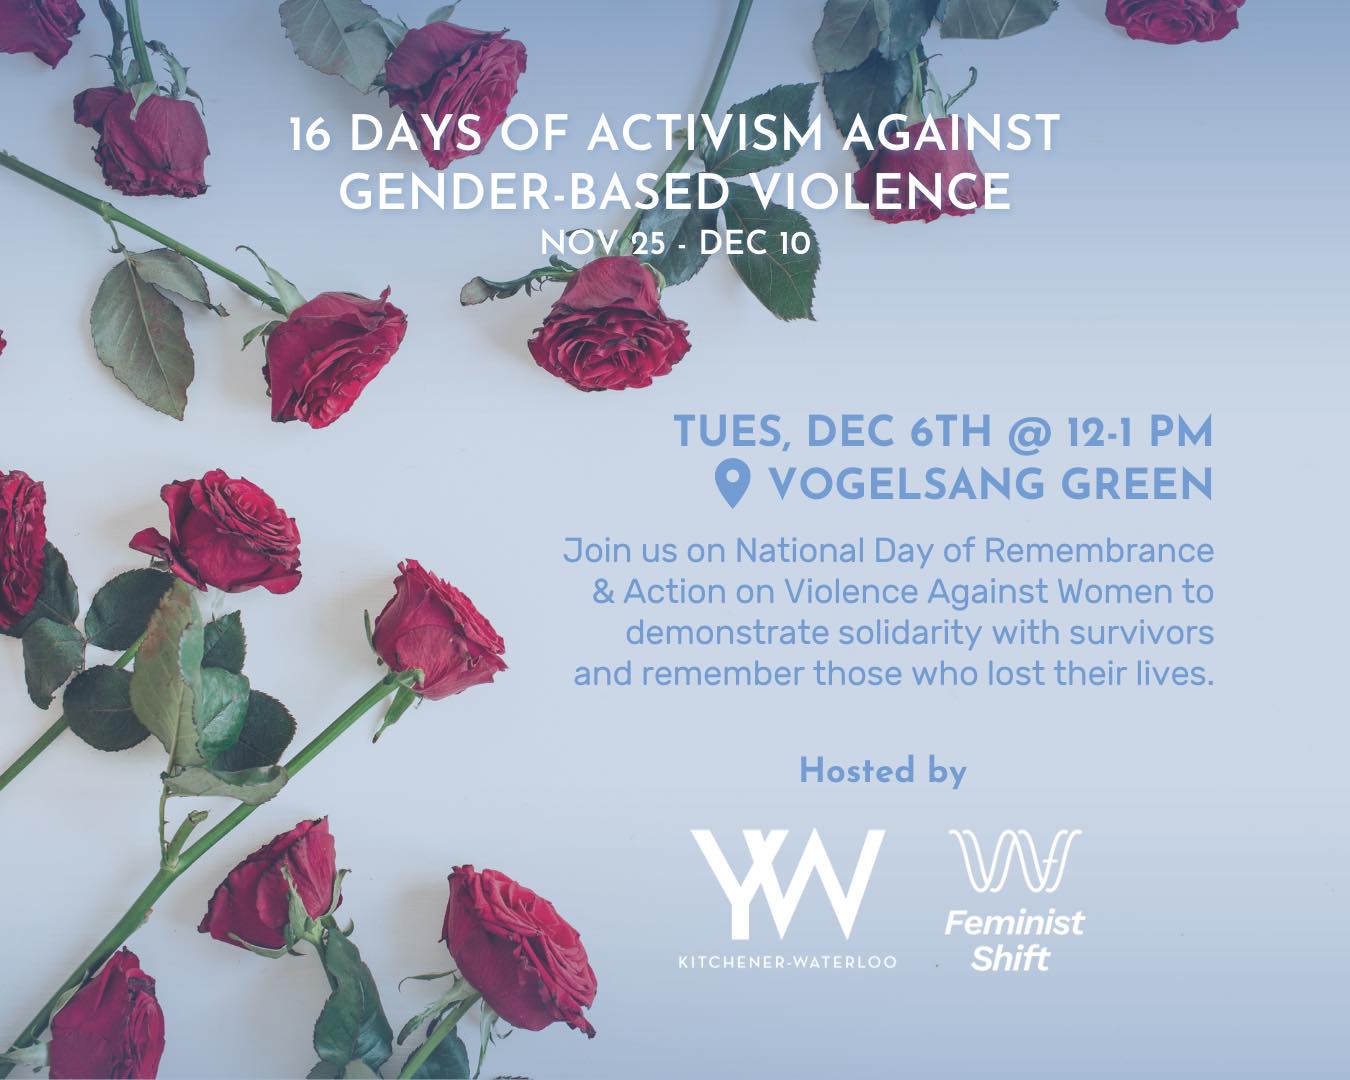 Fourteen rose ceremony to mark National Day of Remembrance and Action on Violence Against Women